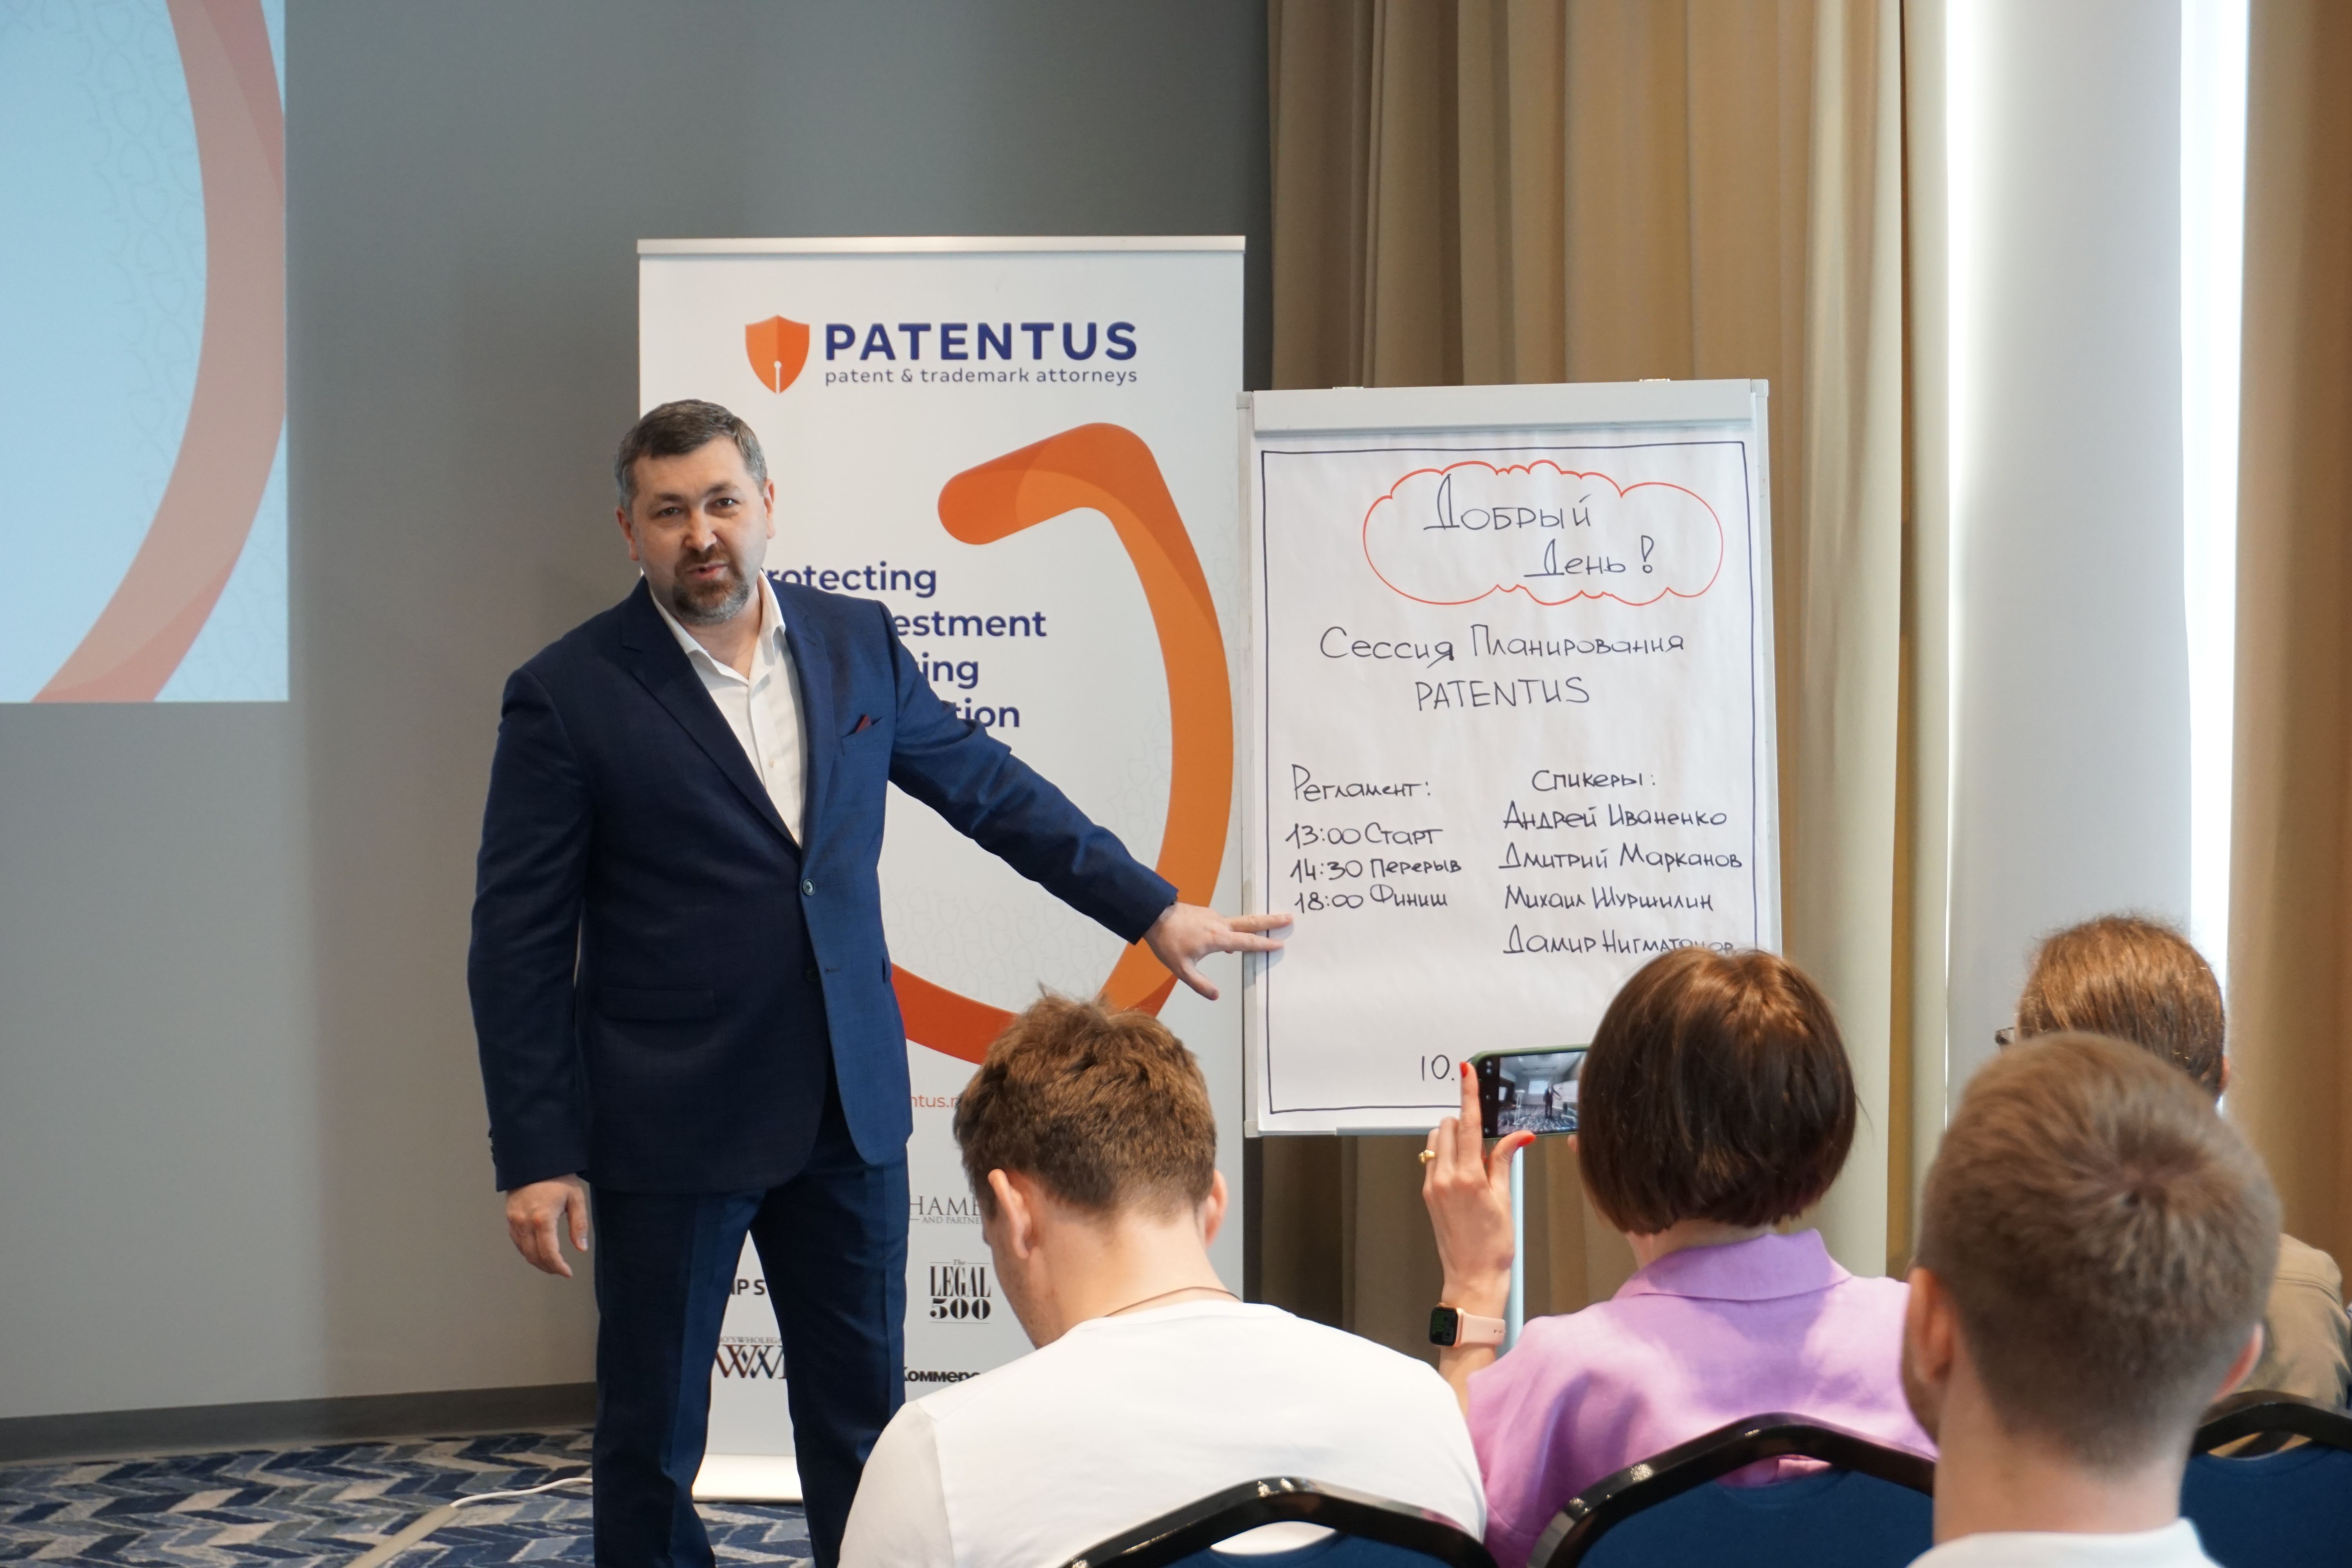 PATENTUS hosted a strategic planning session